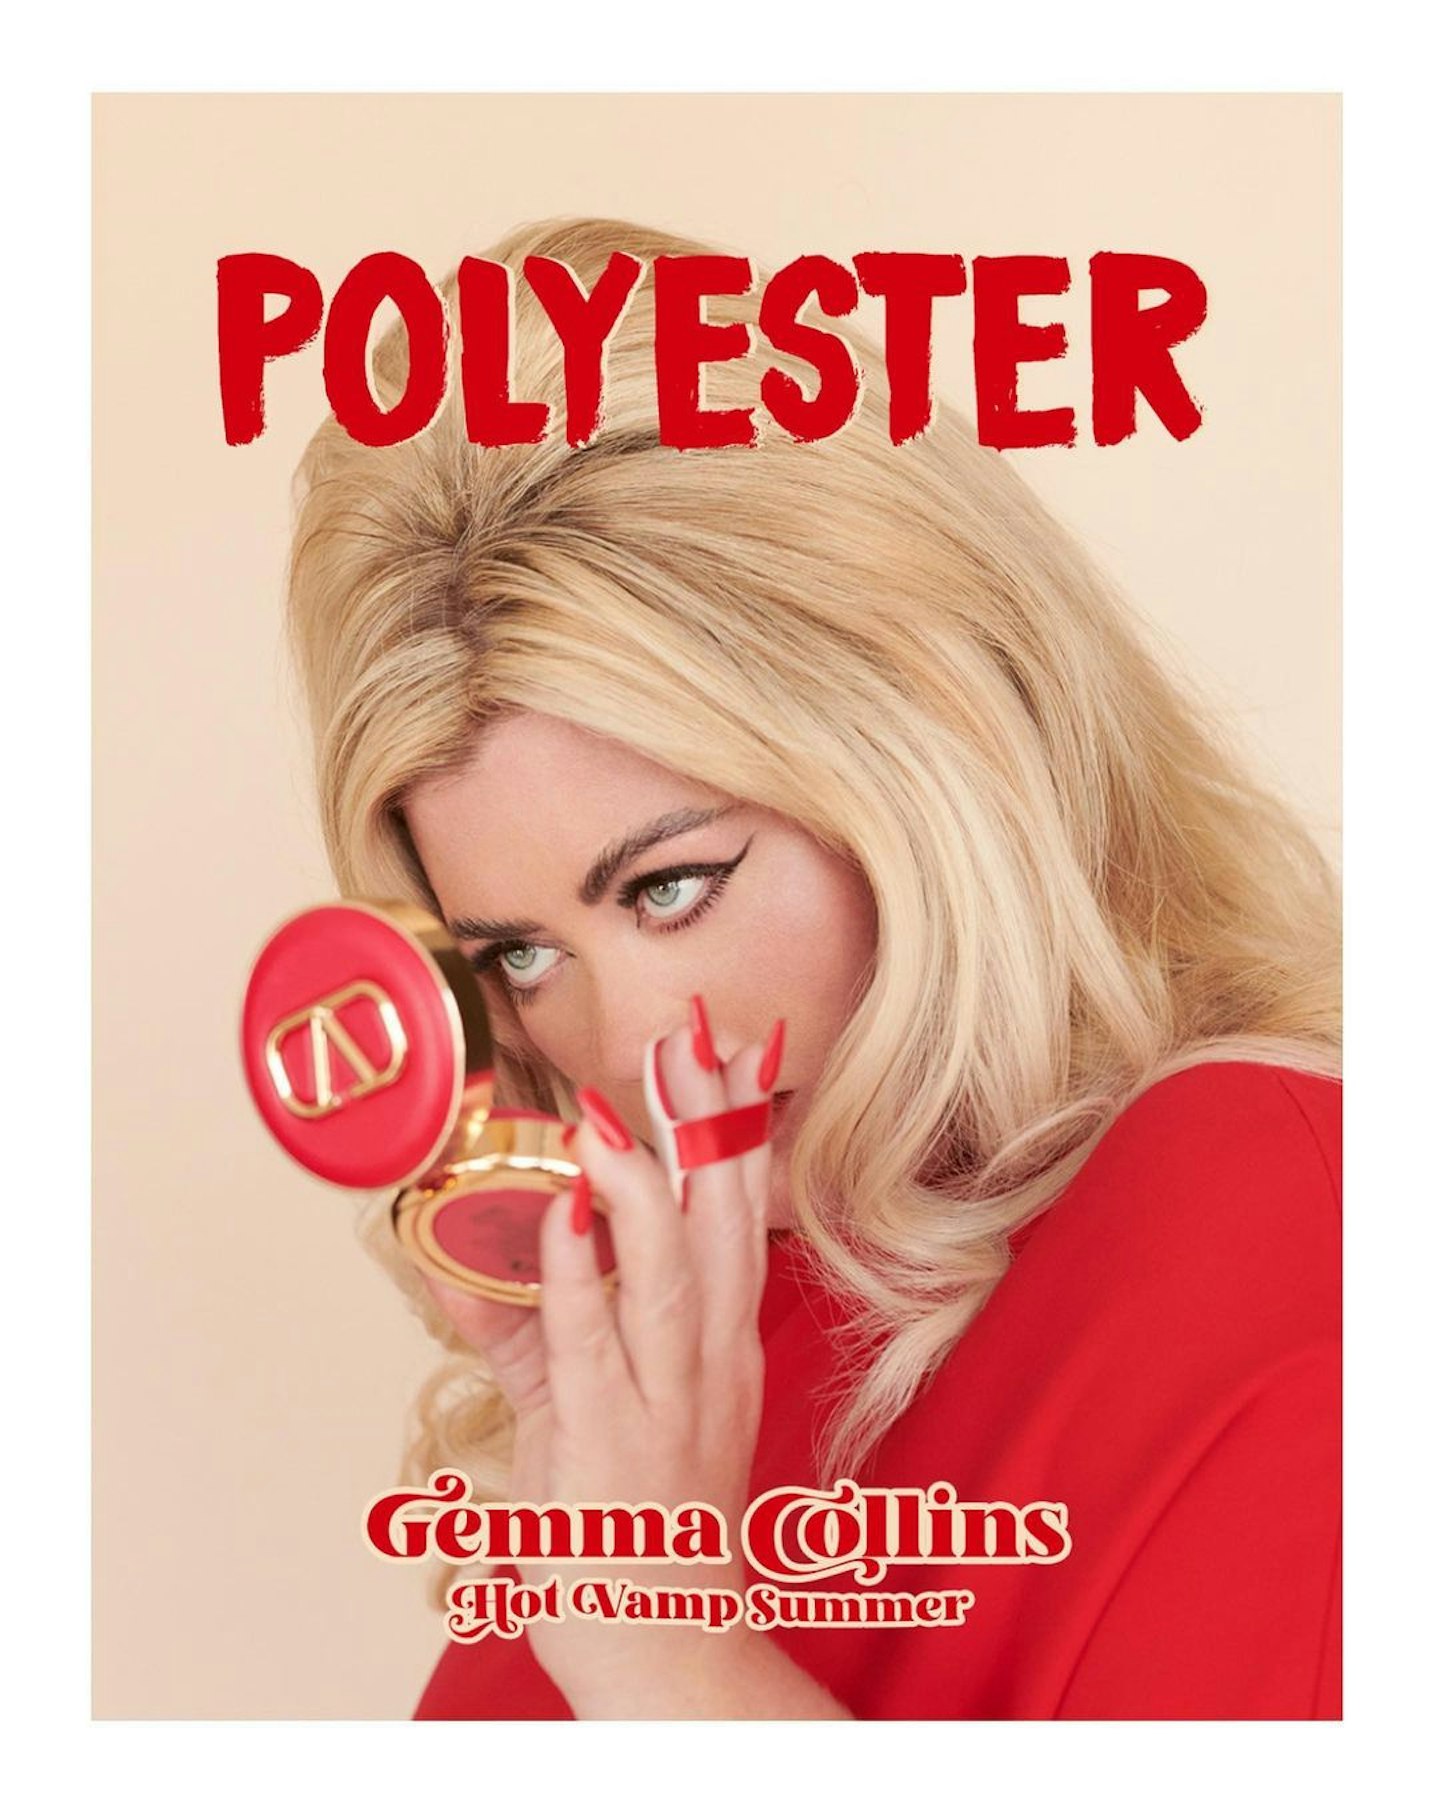 Gemma Collins on the cover of Polyester 